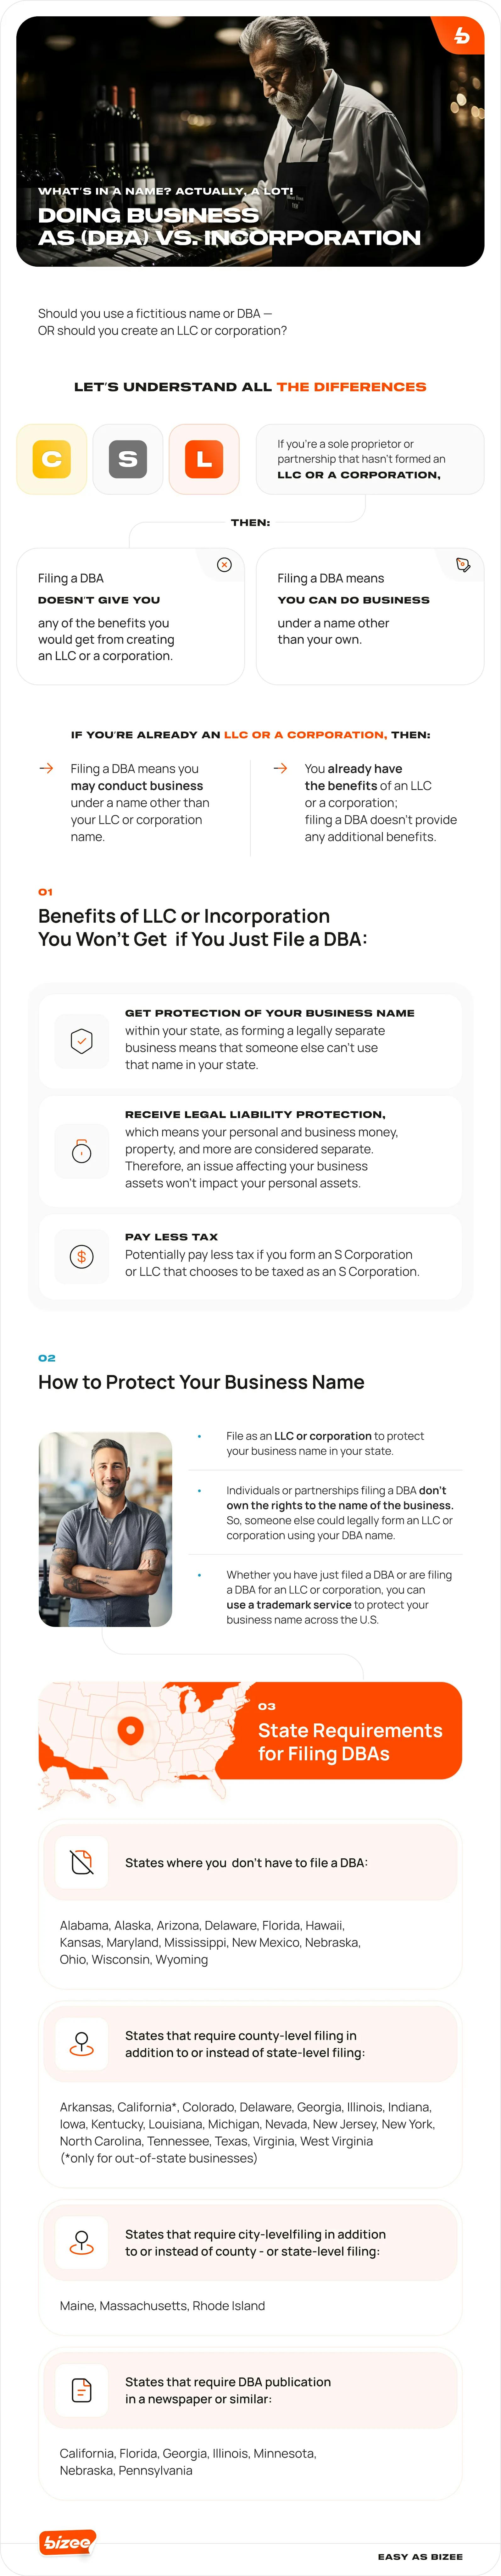 What’s in a Name_ Actually, a Lot! Doing Business As (DBA) vs llc